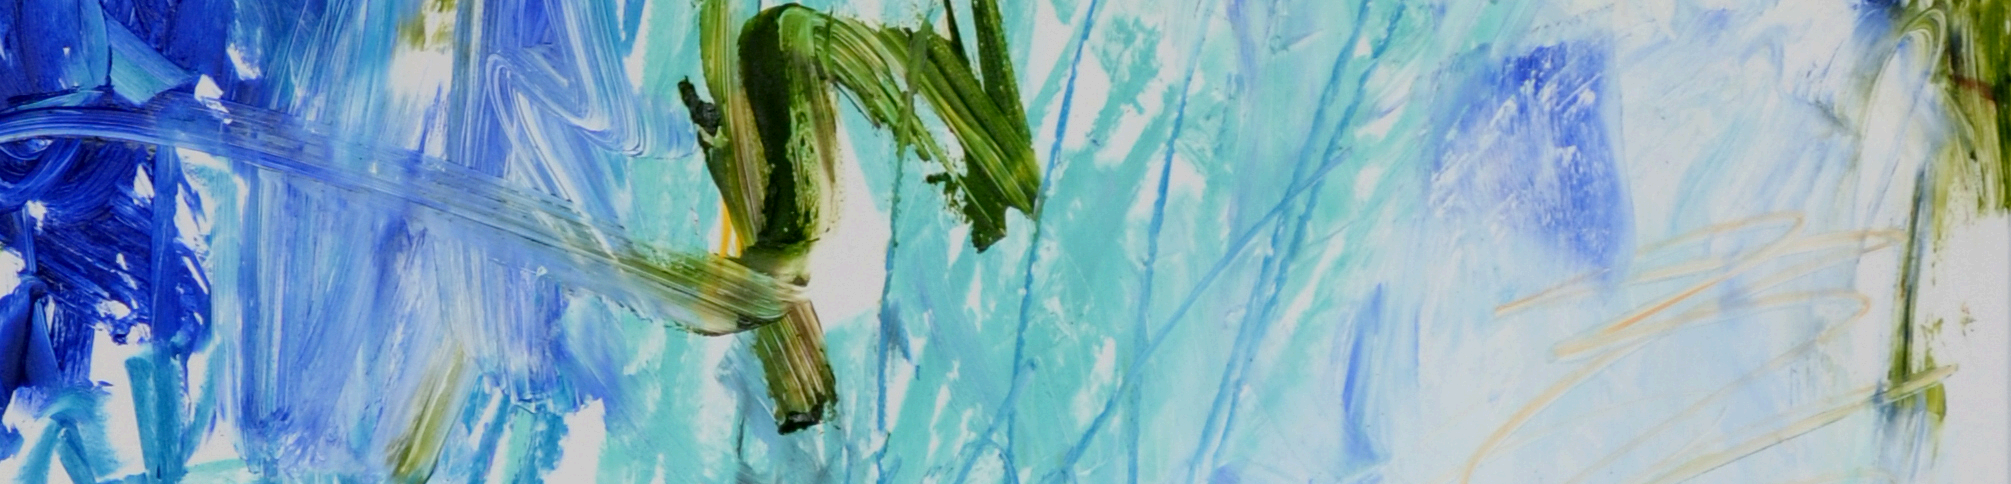 detail of an abstract painting